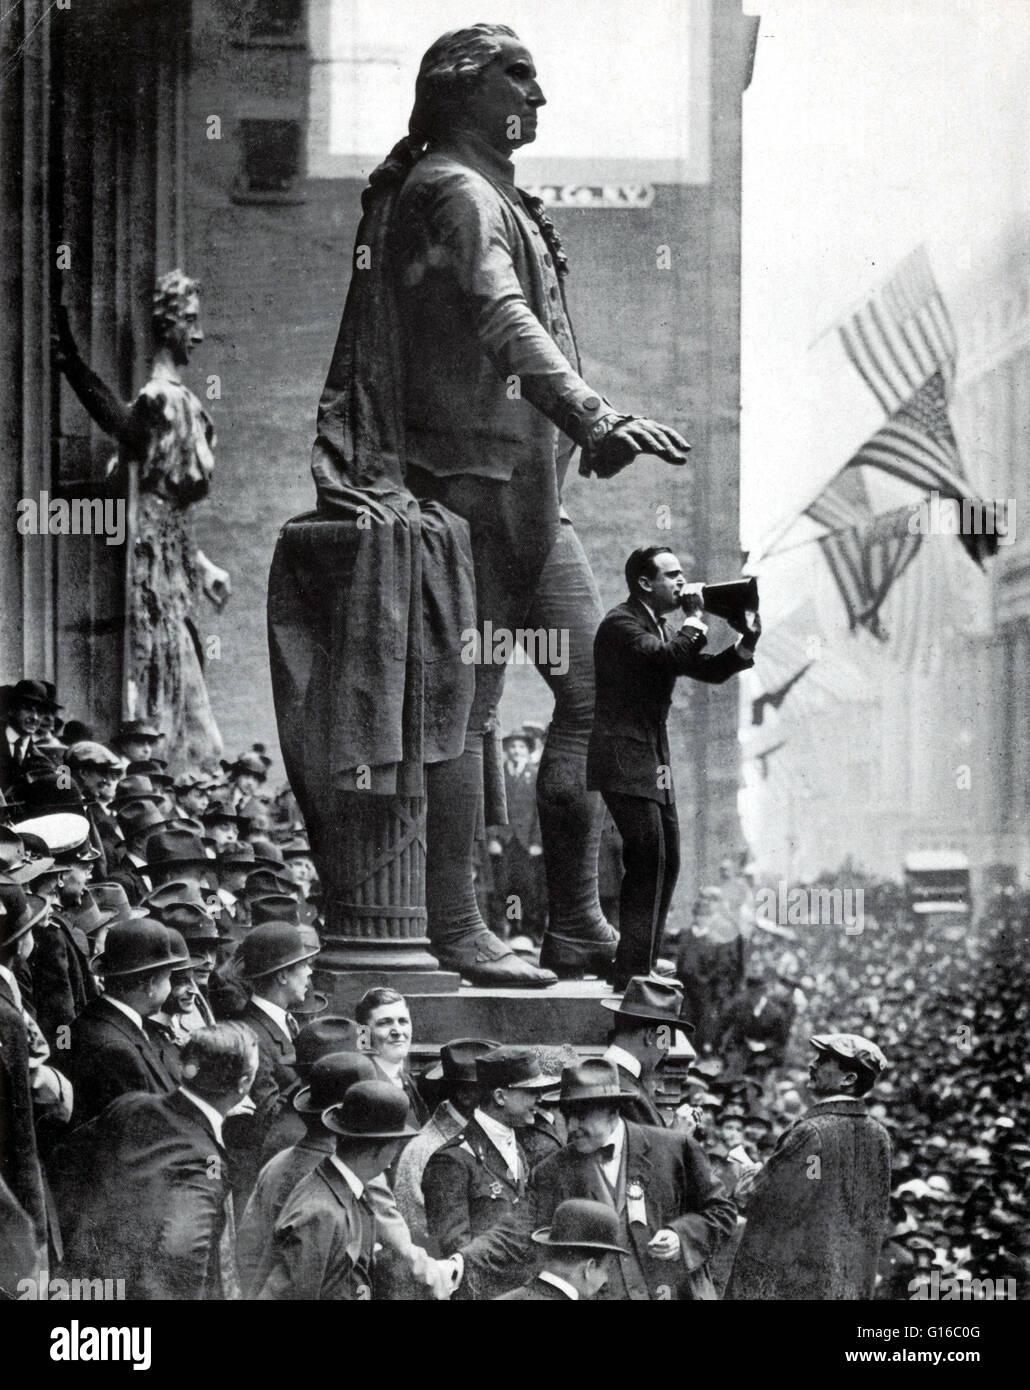 Douglas Fairbanks, movie star, speaking in front of the Sub-Treasury building, New York City, to aid the 3rd Liberty Loan. A Liberty Bond was a war bond that was sold in the United States to support the allied cause in WWI. Subscribing to the bonds became Stock Photo